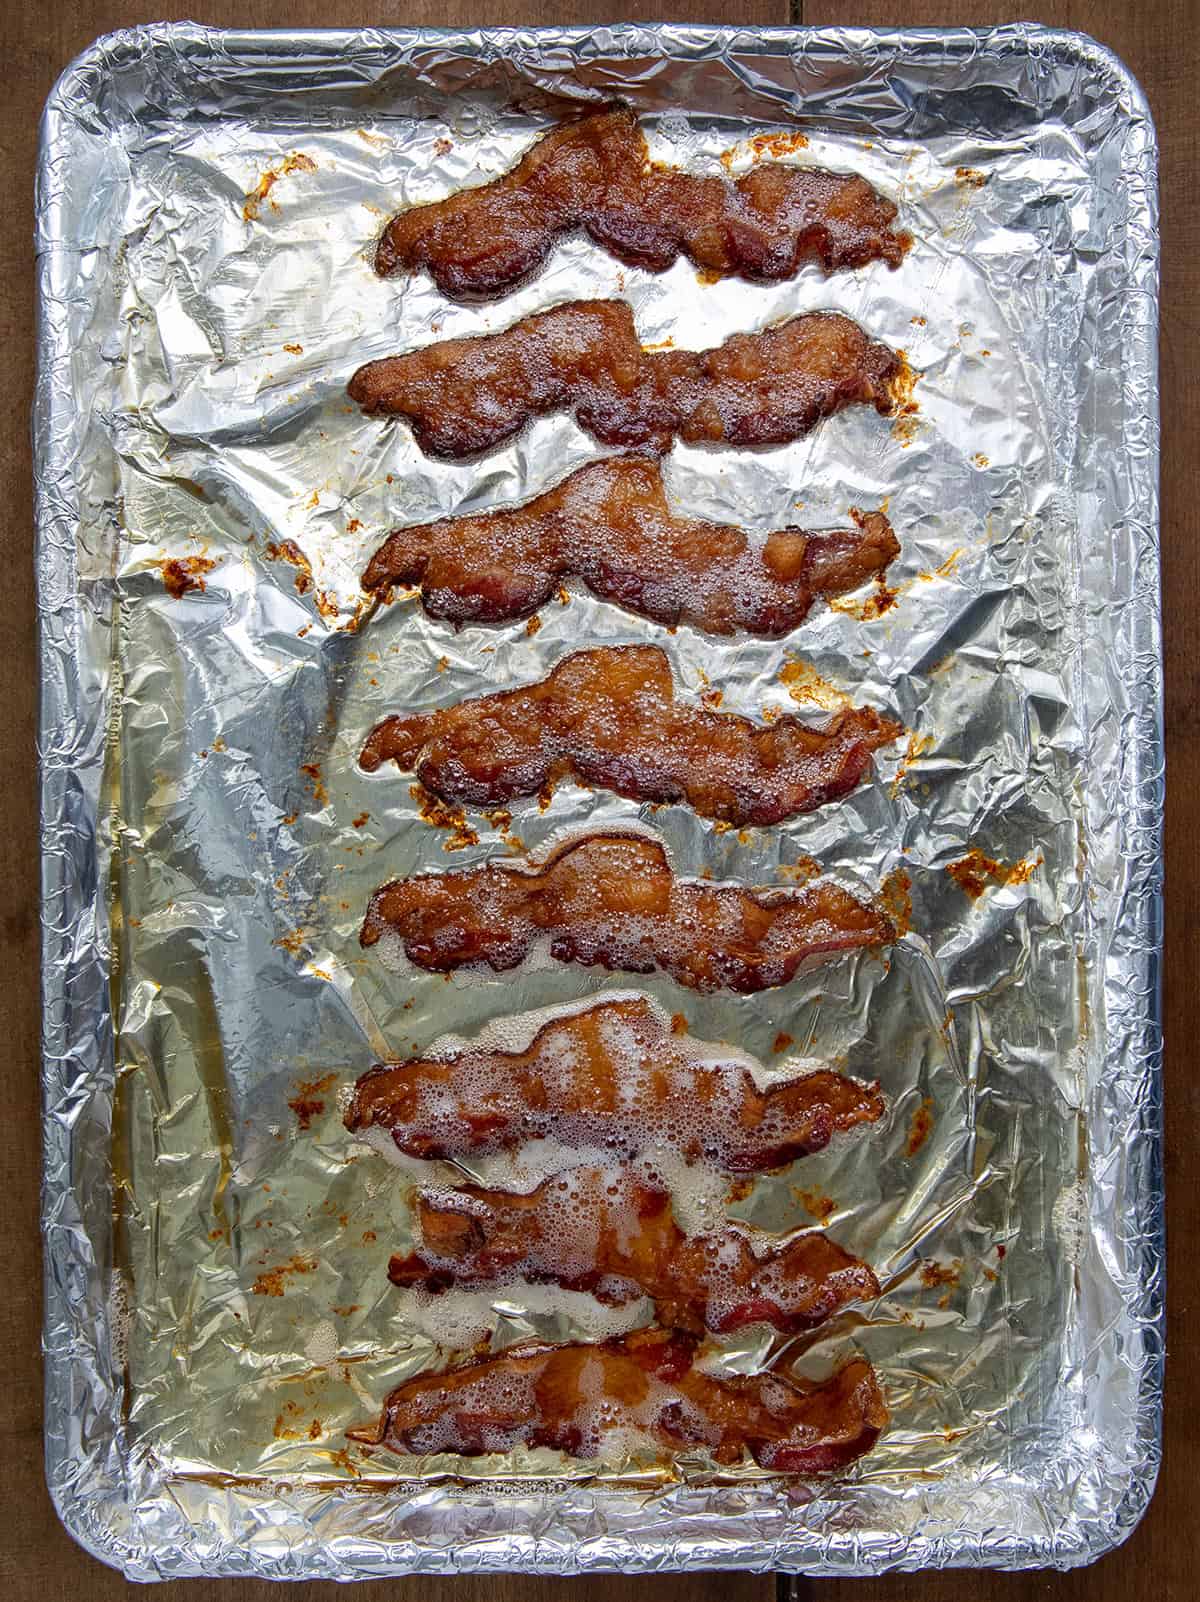 Sheet pan with baked bacon on it.